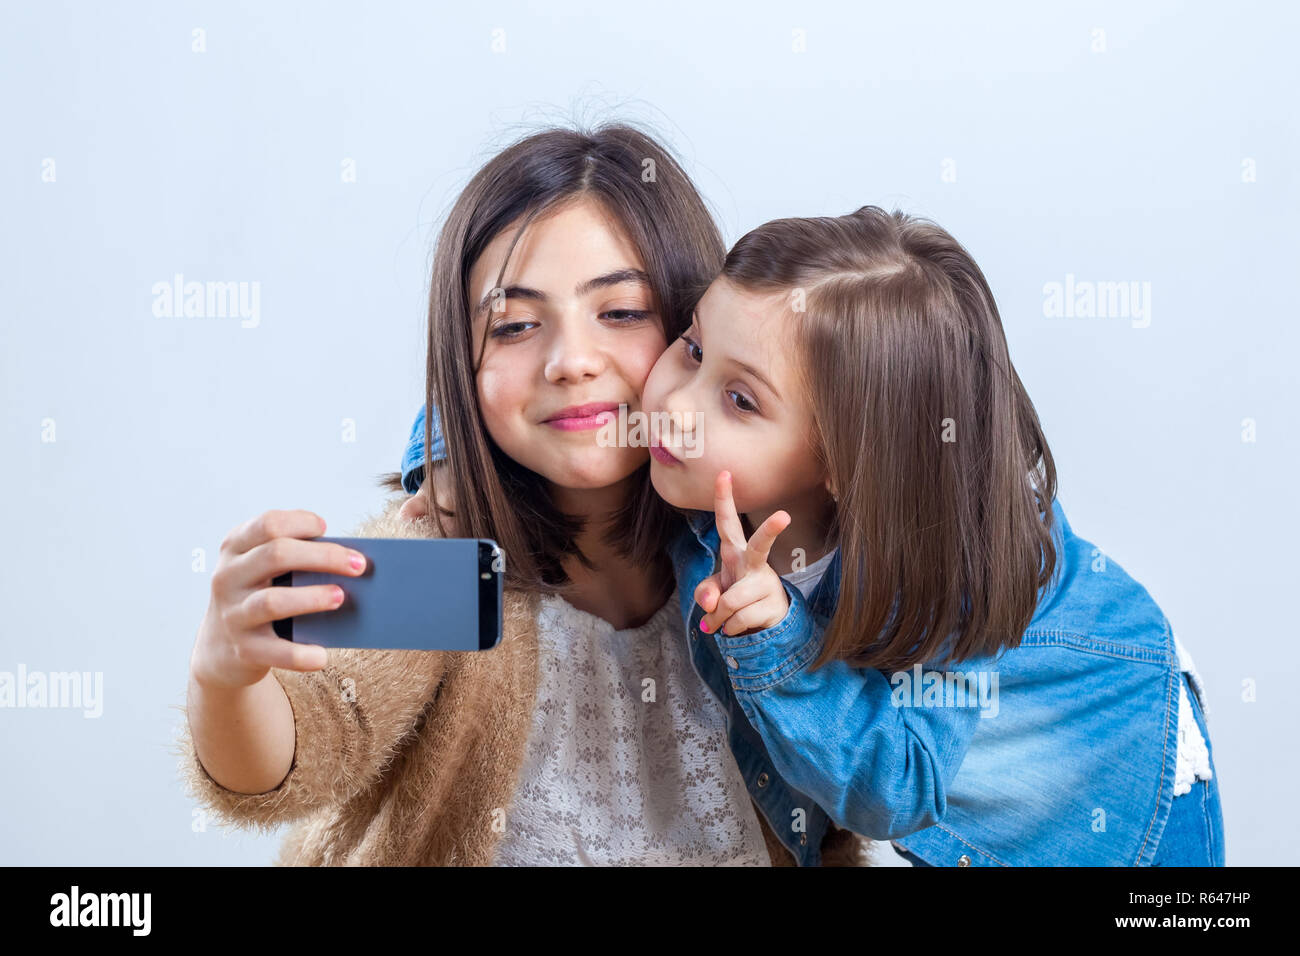 31,953 Two Sisters Posing Images, Stock Photos, 3D objects, & Vectors |  Shutterstock